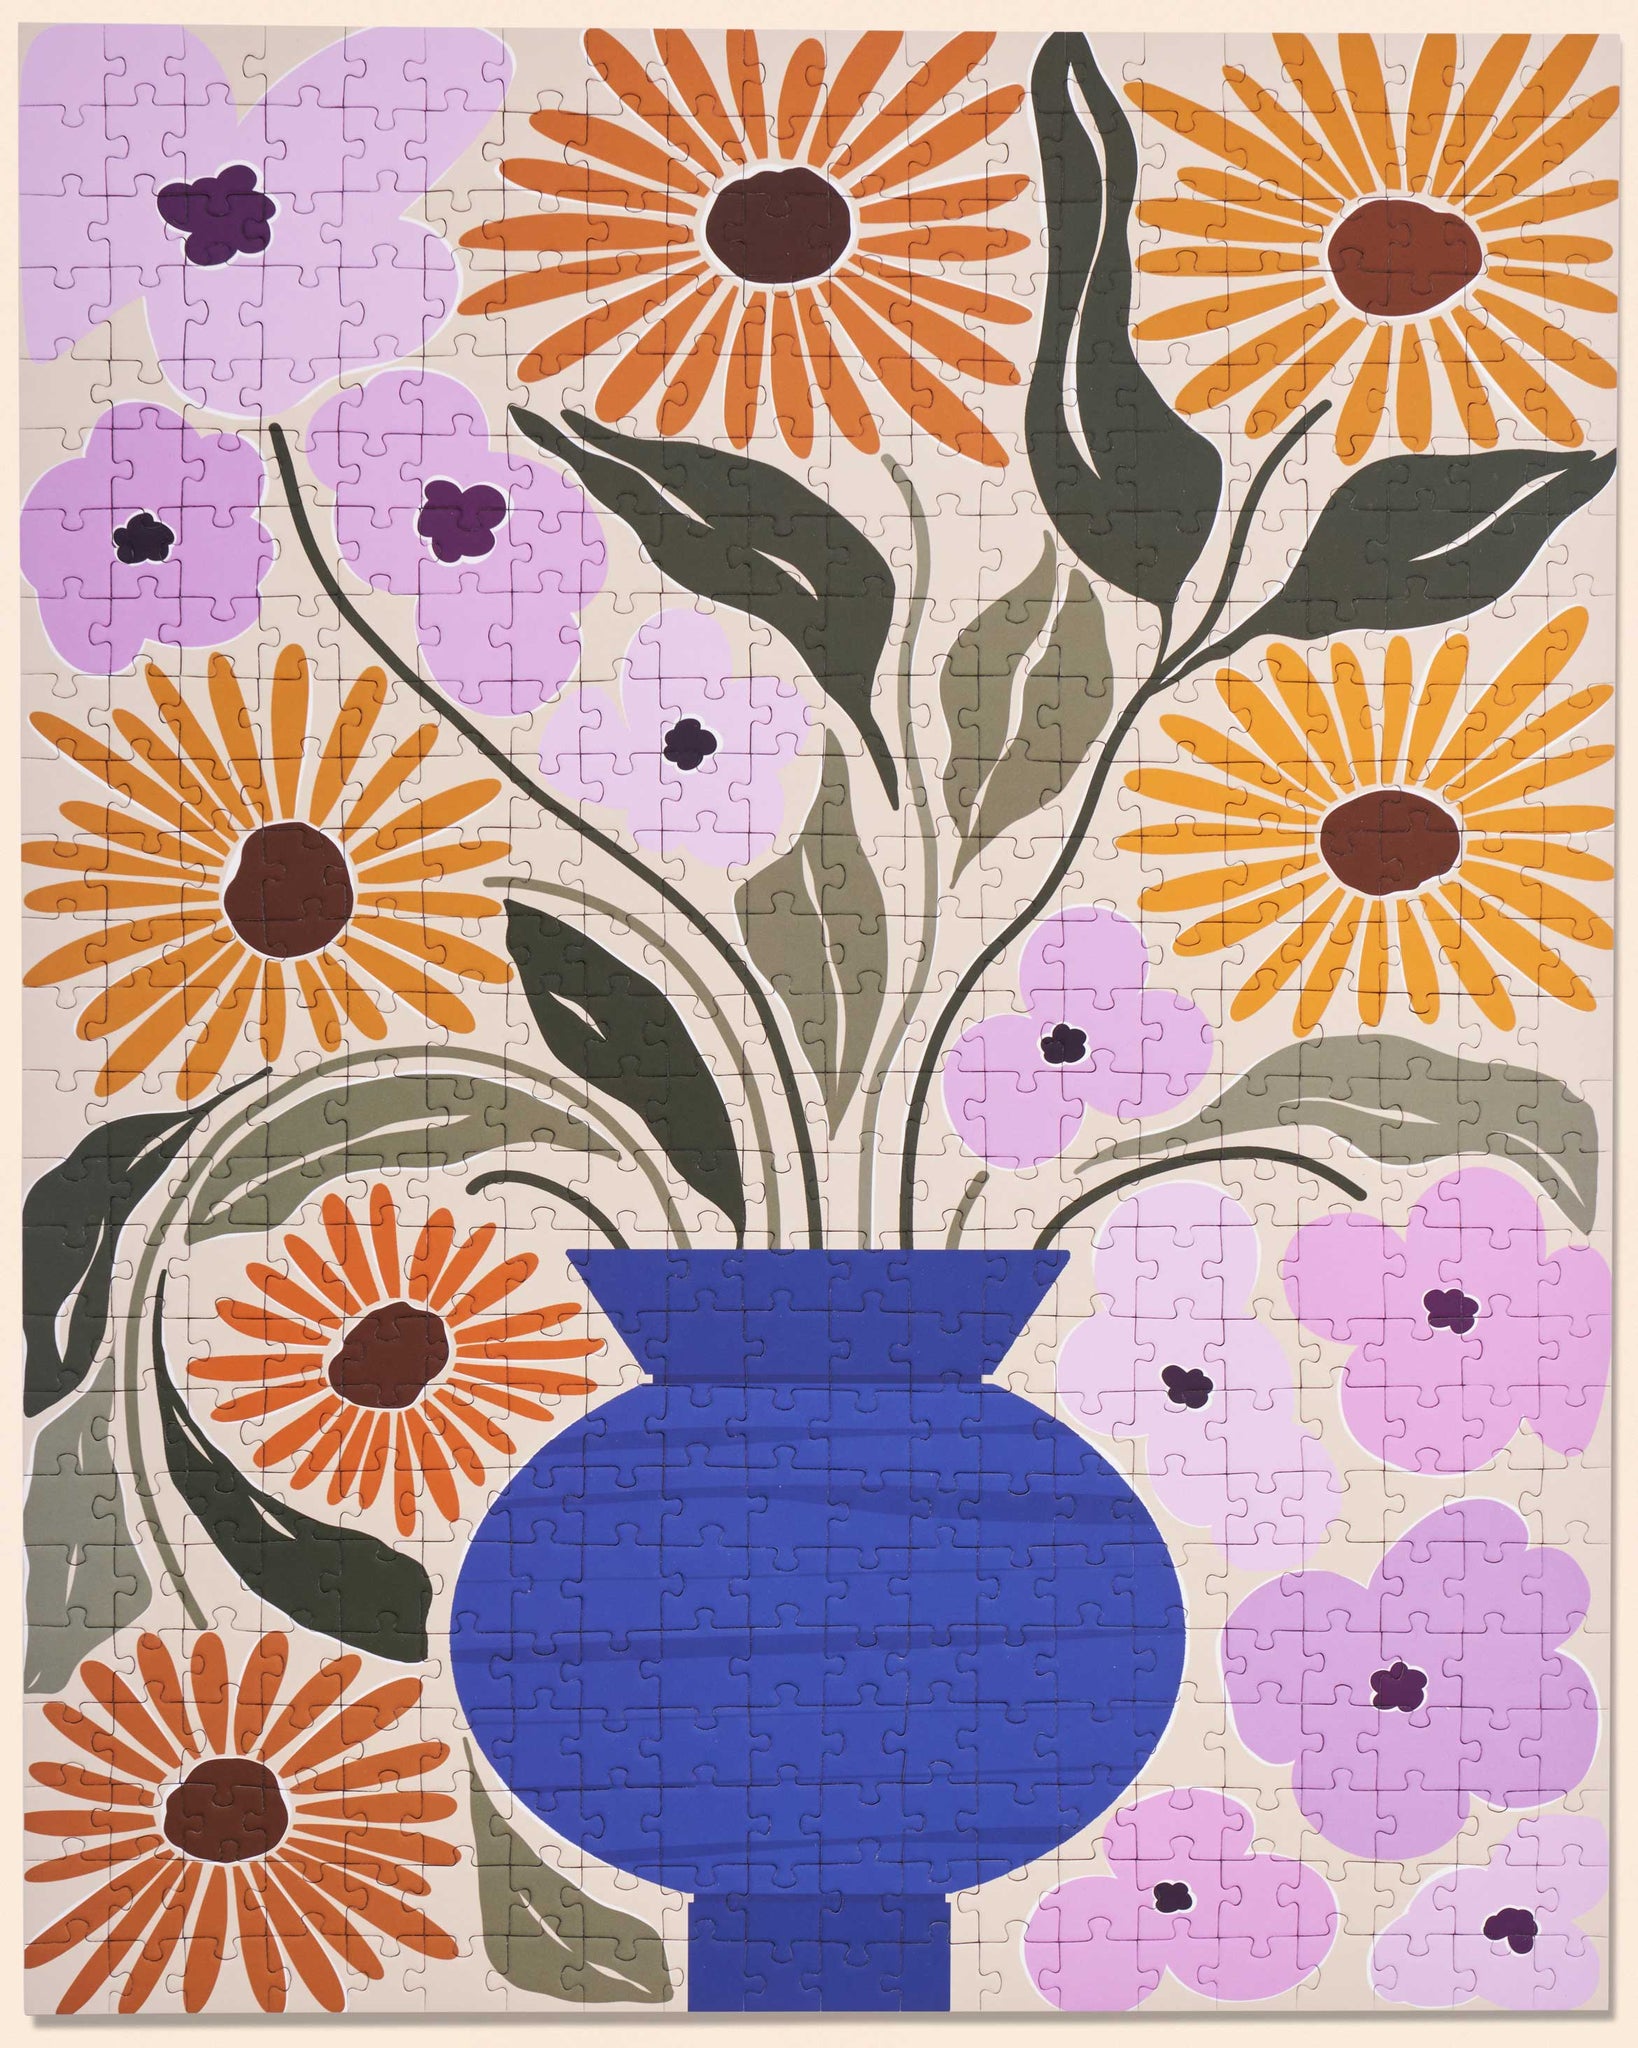 Vase of Flowers Puzzle by Frankie Penwill - Ordinary Habit